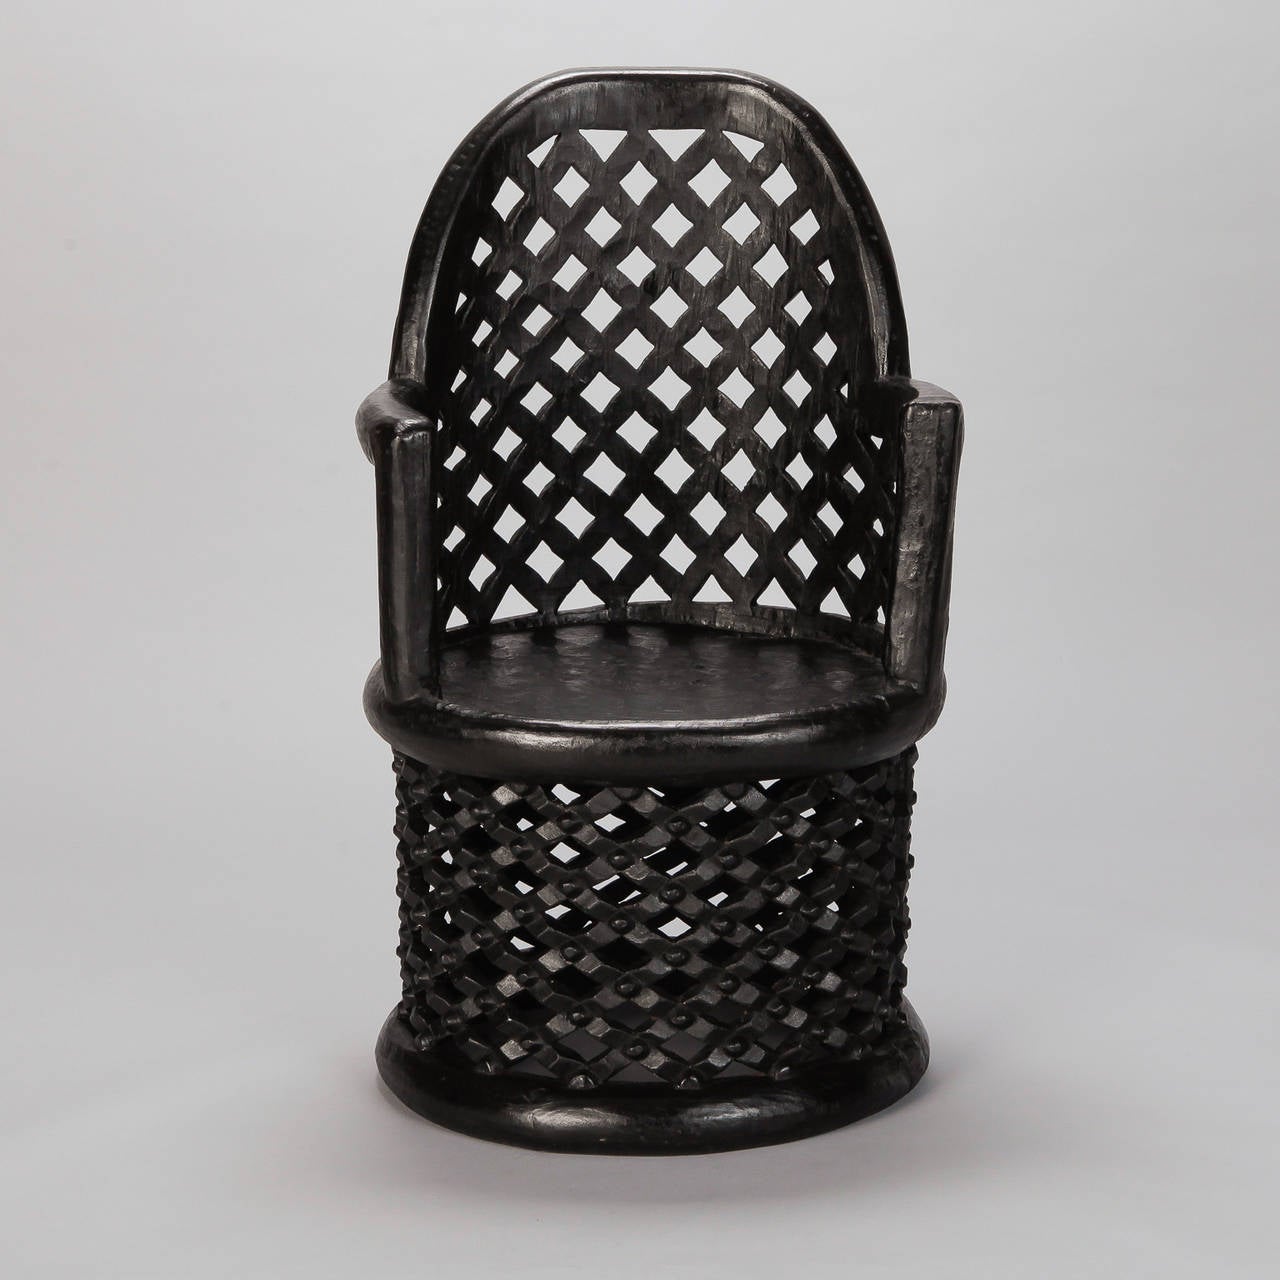 Carved Bamileke spider armchair from Cameroon, circa 1980s. hand-carved dark wood armchair with rounded, open-work back, round seat and open work pedestal base. Two available - sold separately.

Chair #1:
23” W x 37.5” H x 23” D.
Arm height: